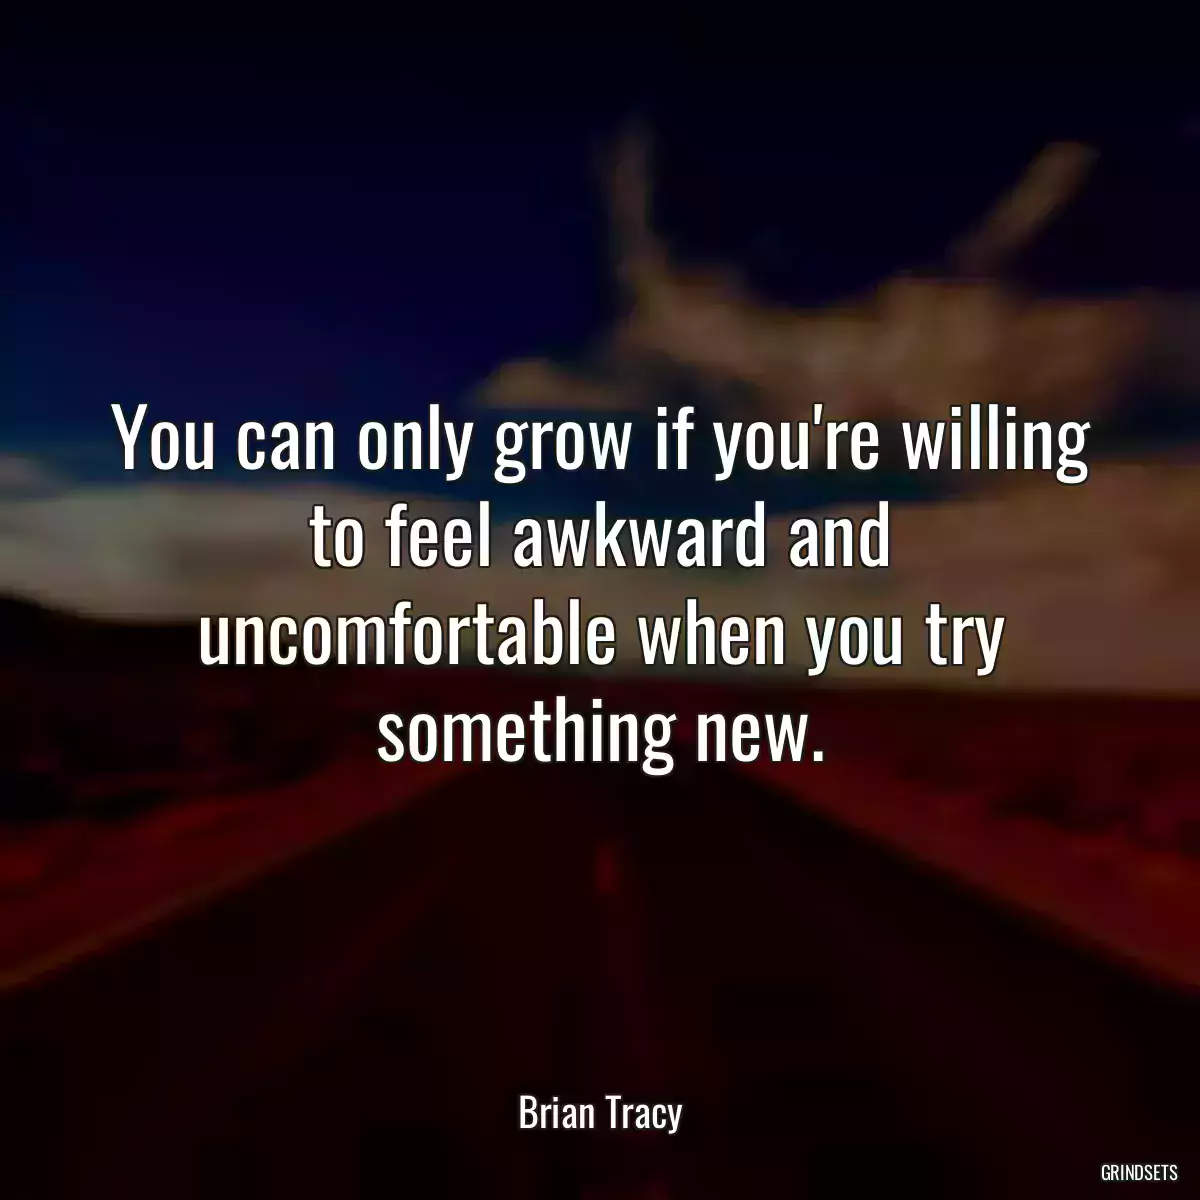 You can only grow if you\'re willing to feel awkward and uncomfortable when you try something new.